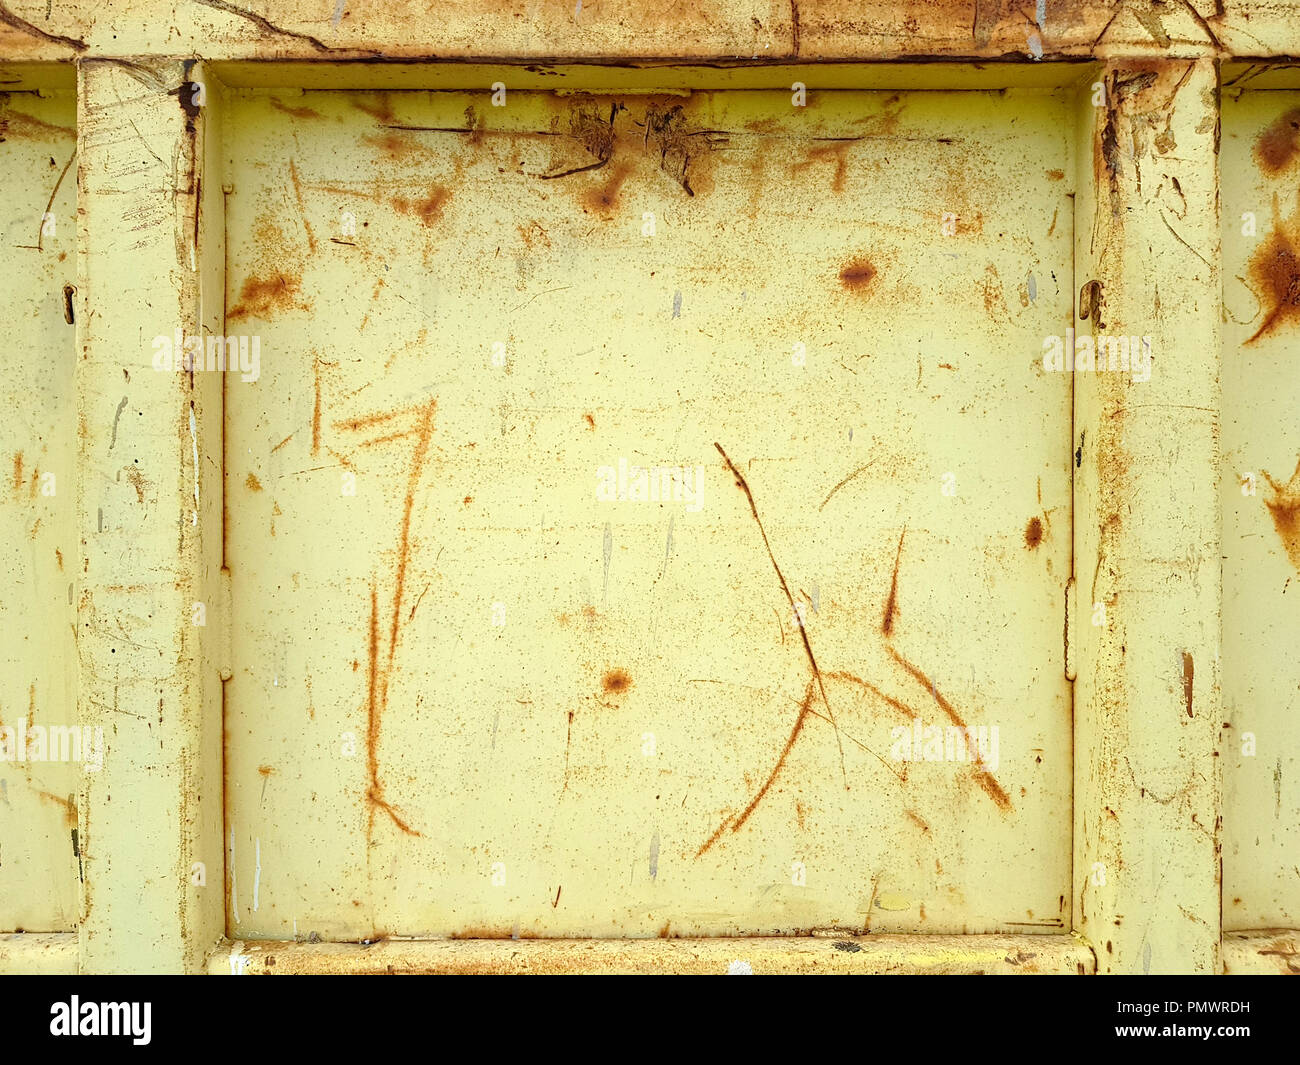 Old rusty yellow painted metallic construction as a full frame background. Stock Photo